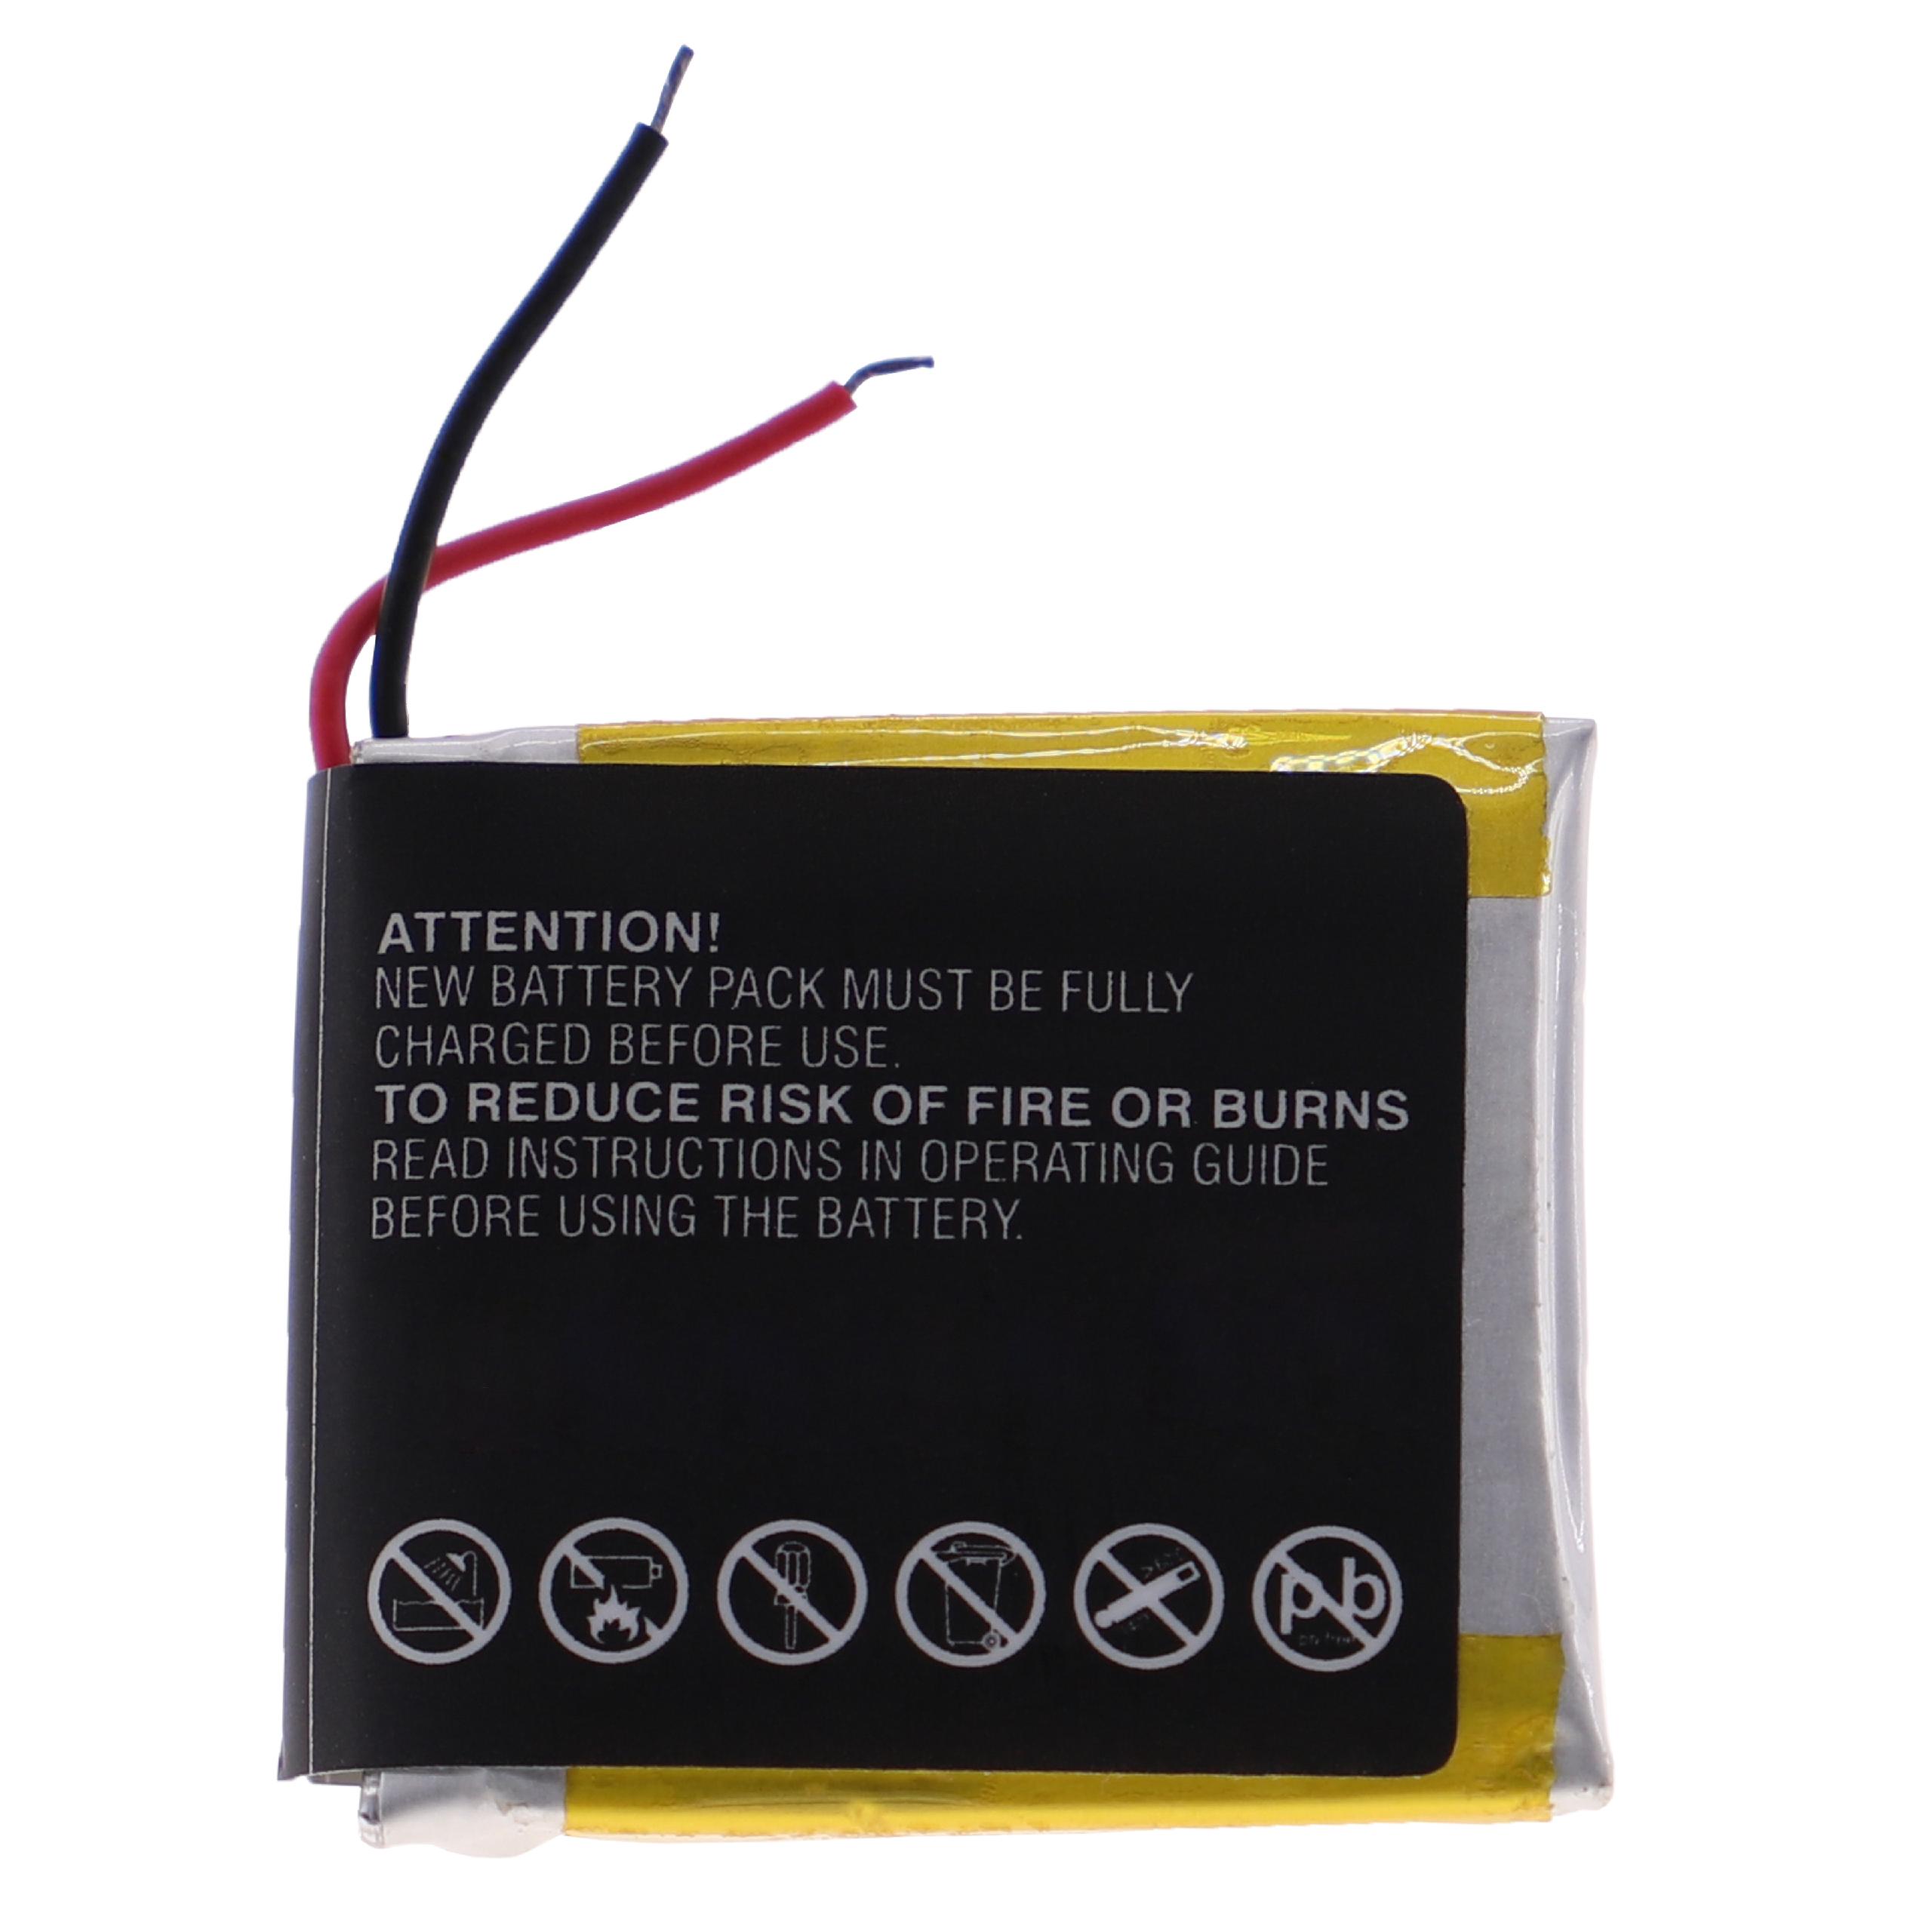 Battery Replacement for Plutour CANR-G15 - 370mAh, 3.7V, Li-polymer